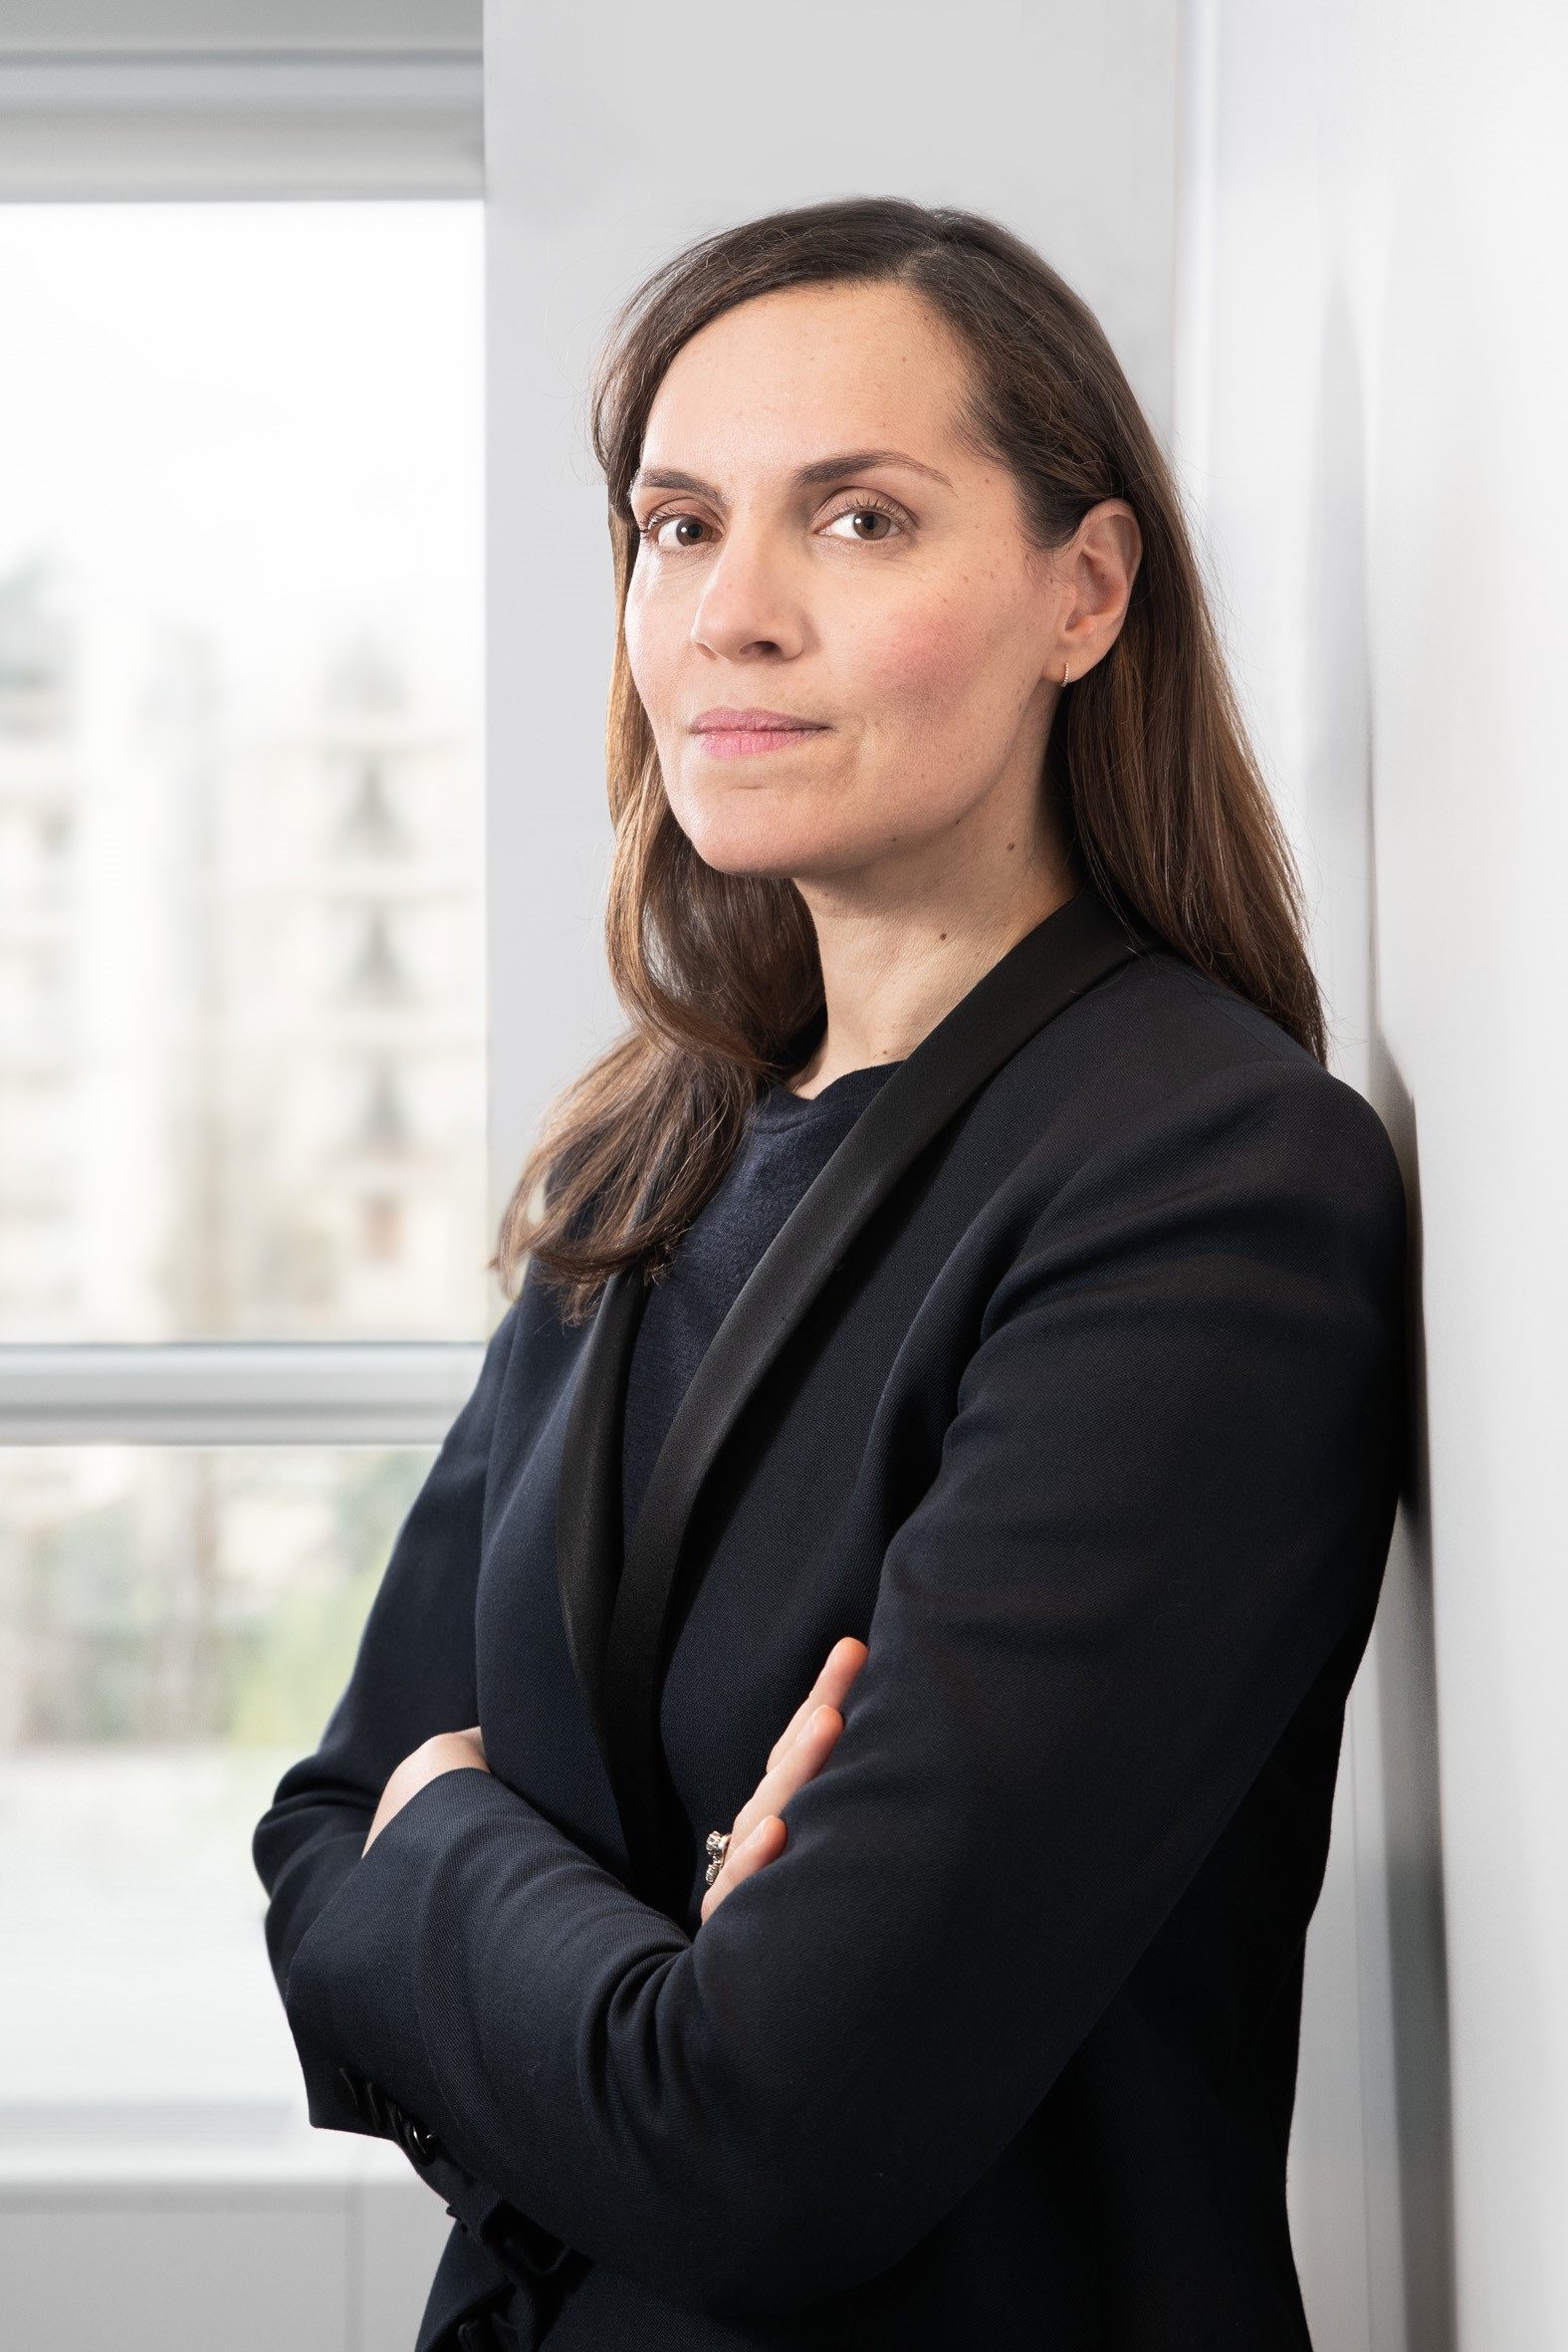 Lisa Attia is the CEO of Moynat, a trunk maker and one of the oldest French luxury brands, established in Paris back in 1849 and now owned by LVMH. Photo: DR